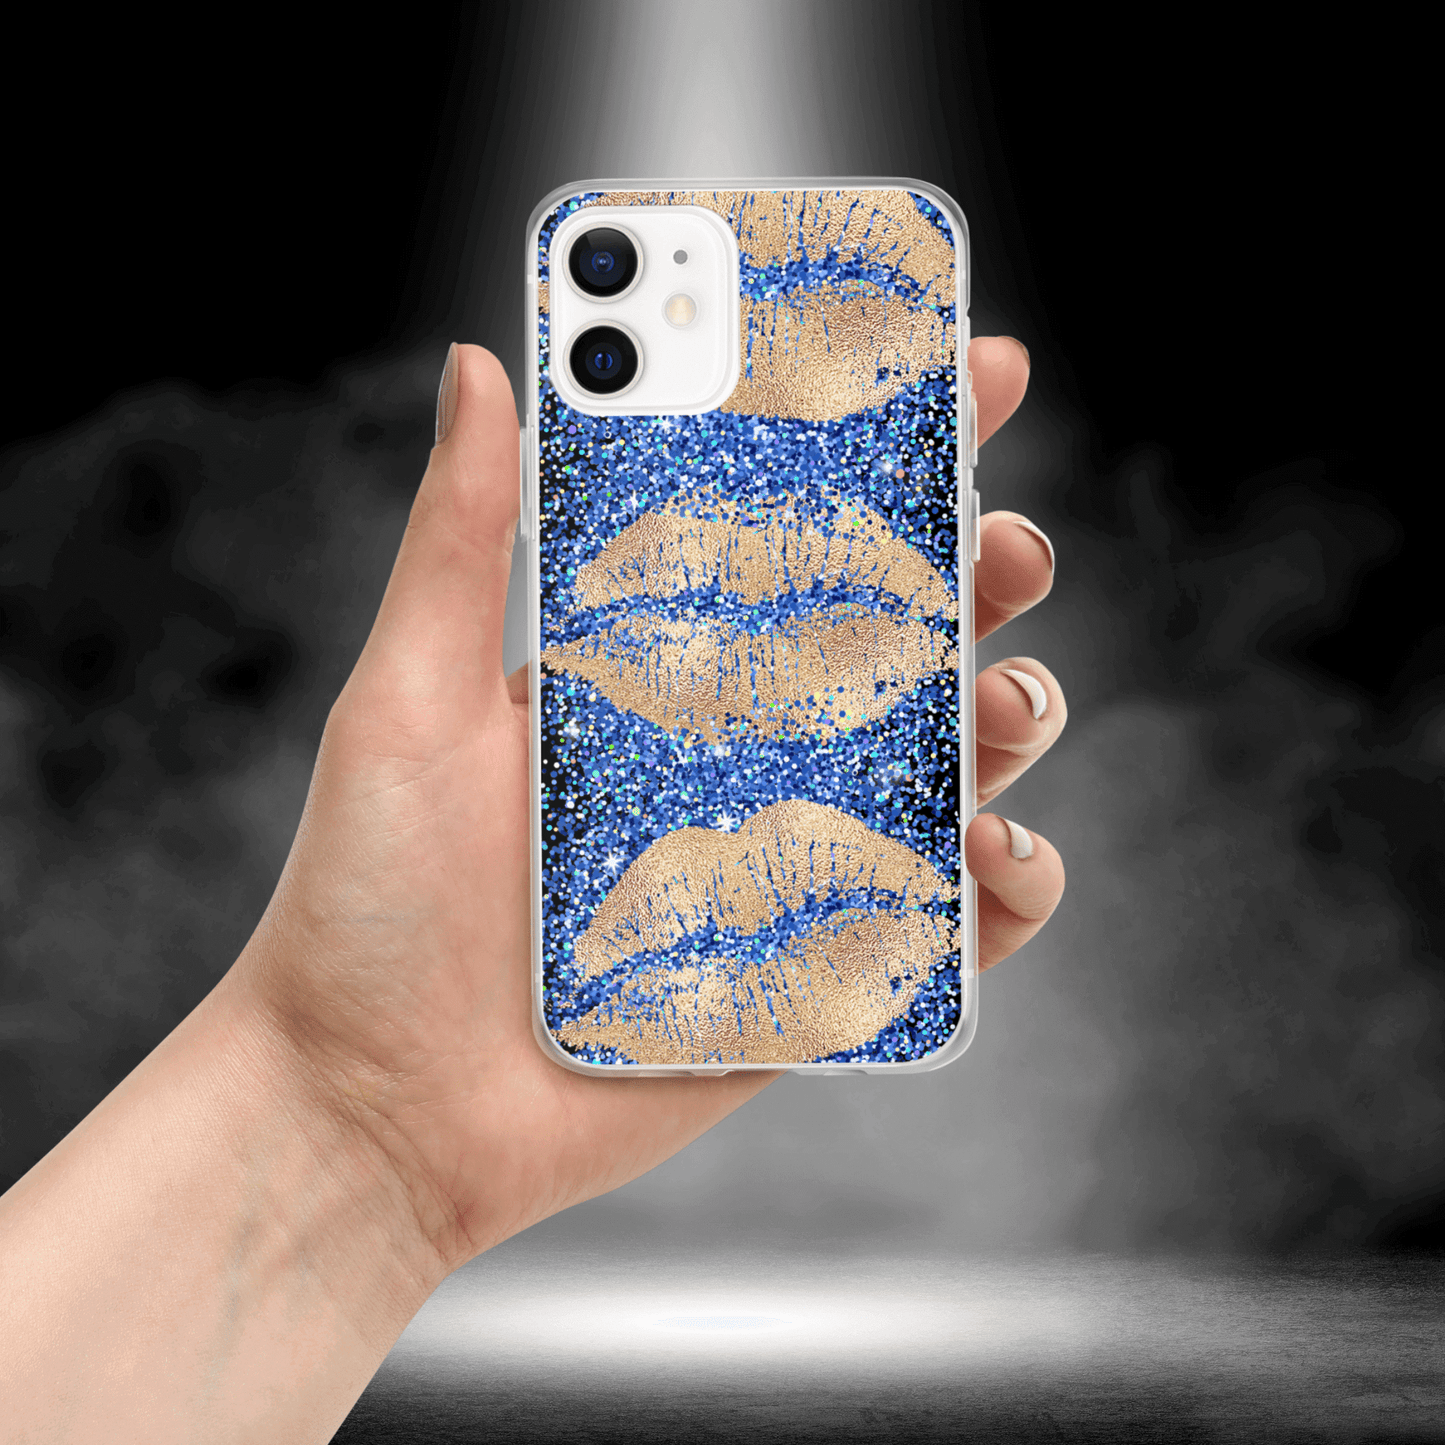 iPhone Cover - Lips of Gold - BiteMeNow